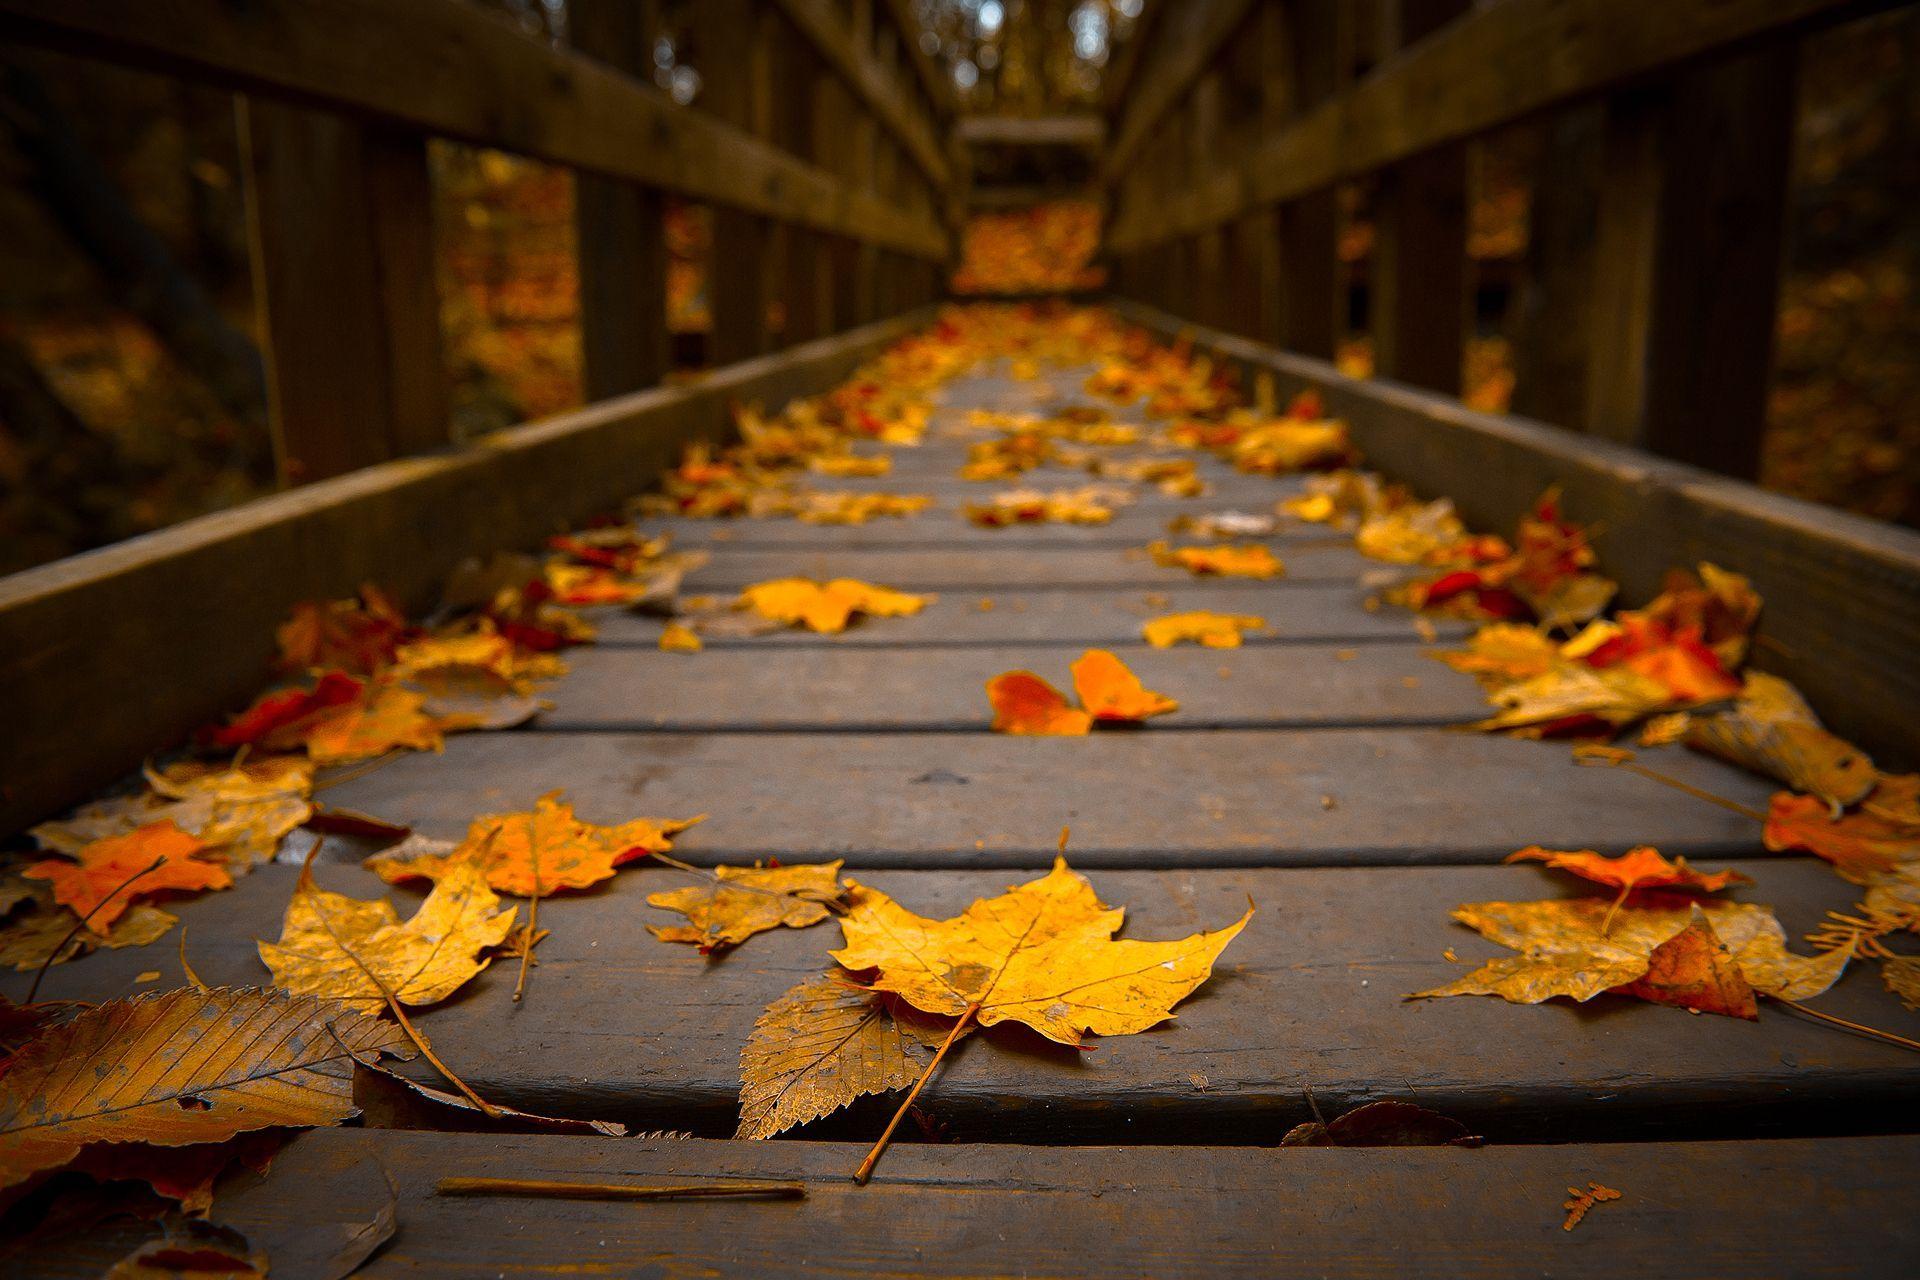 Autumn Leaf Falling Wallpapers - Wallpaper Cave